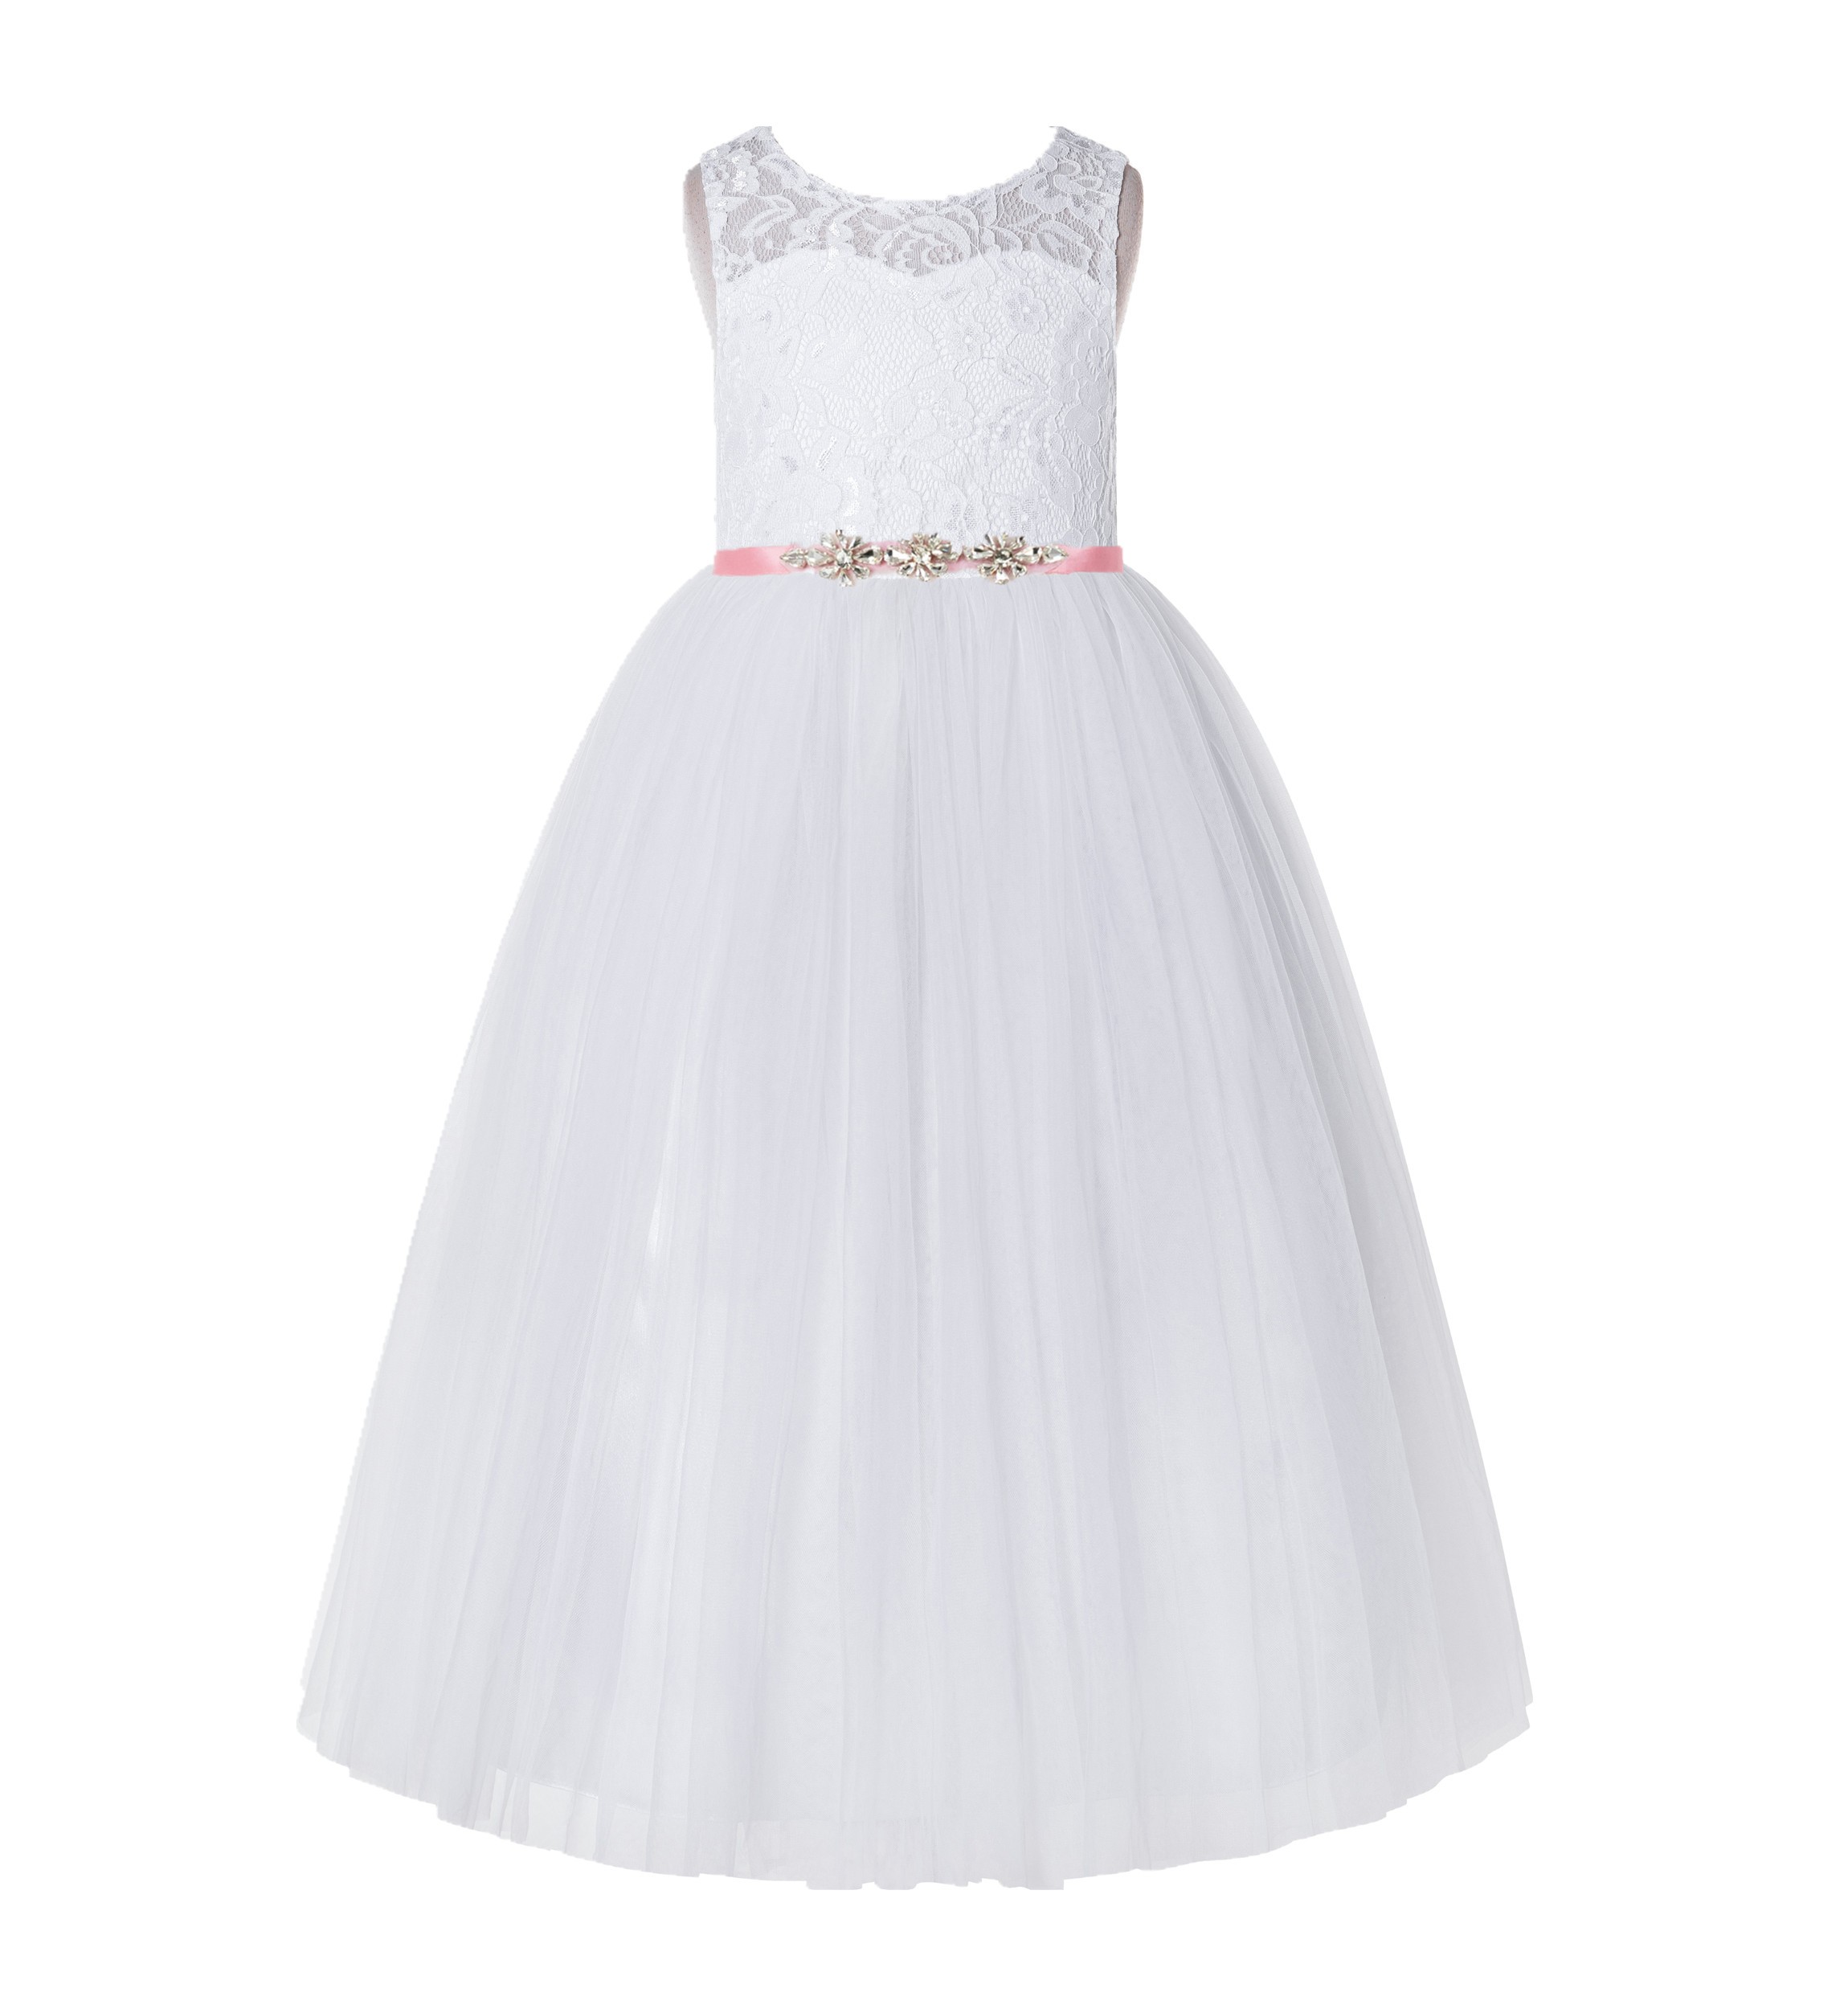 White / Dusty Rose A-Line Tulle Lace Flower Girl Dress 178R4